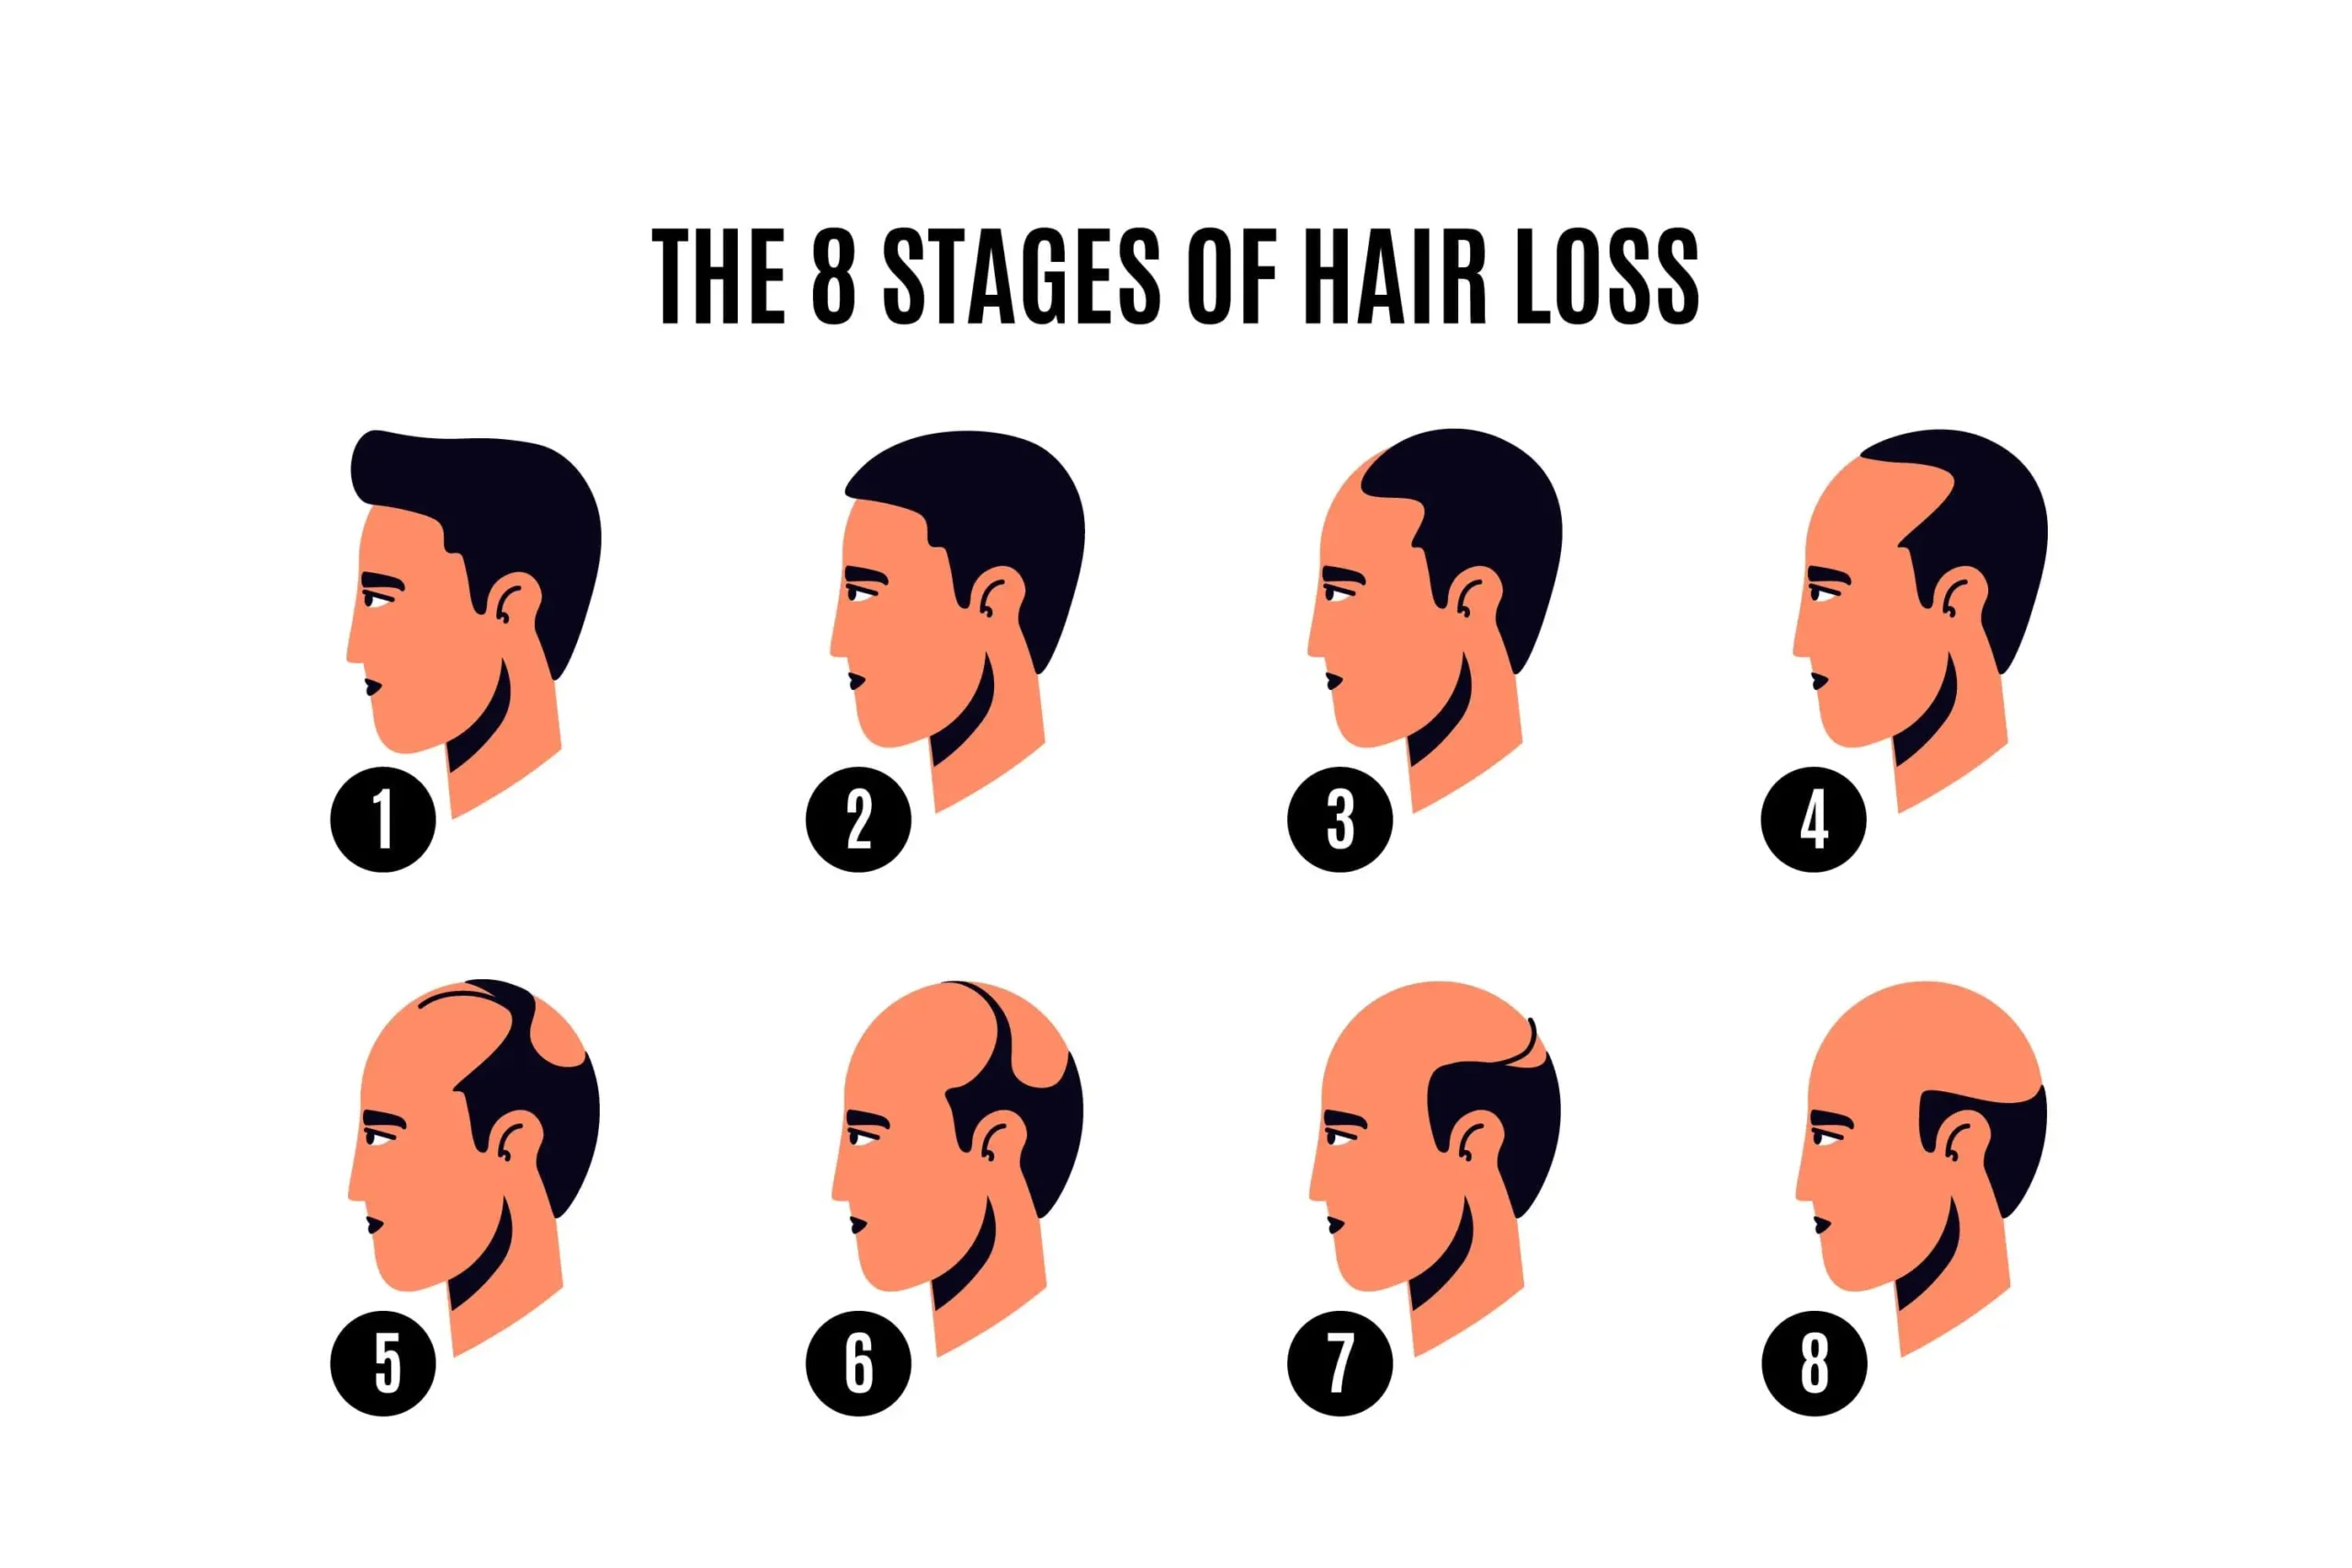 Norwood Scale: A Guide to Hair Loss Stages and Treatment Options